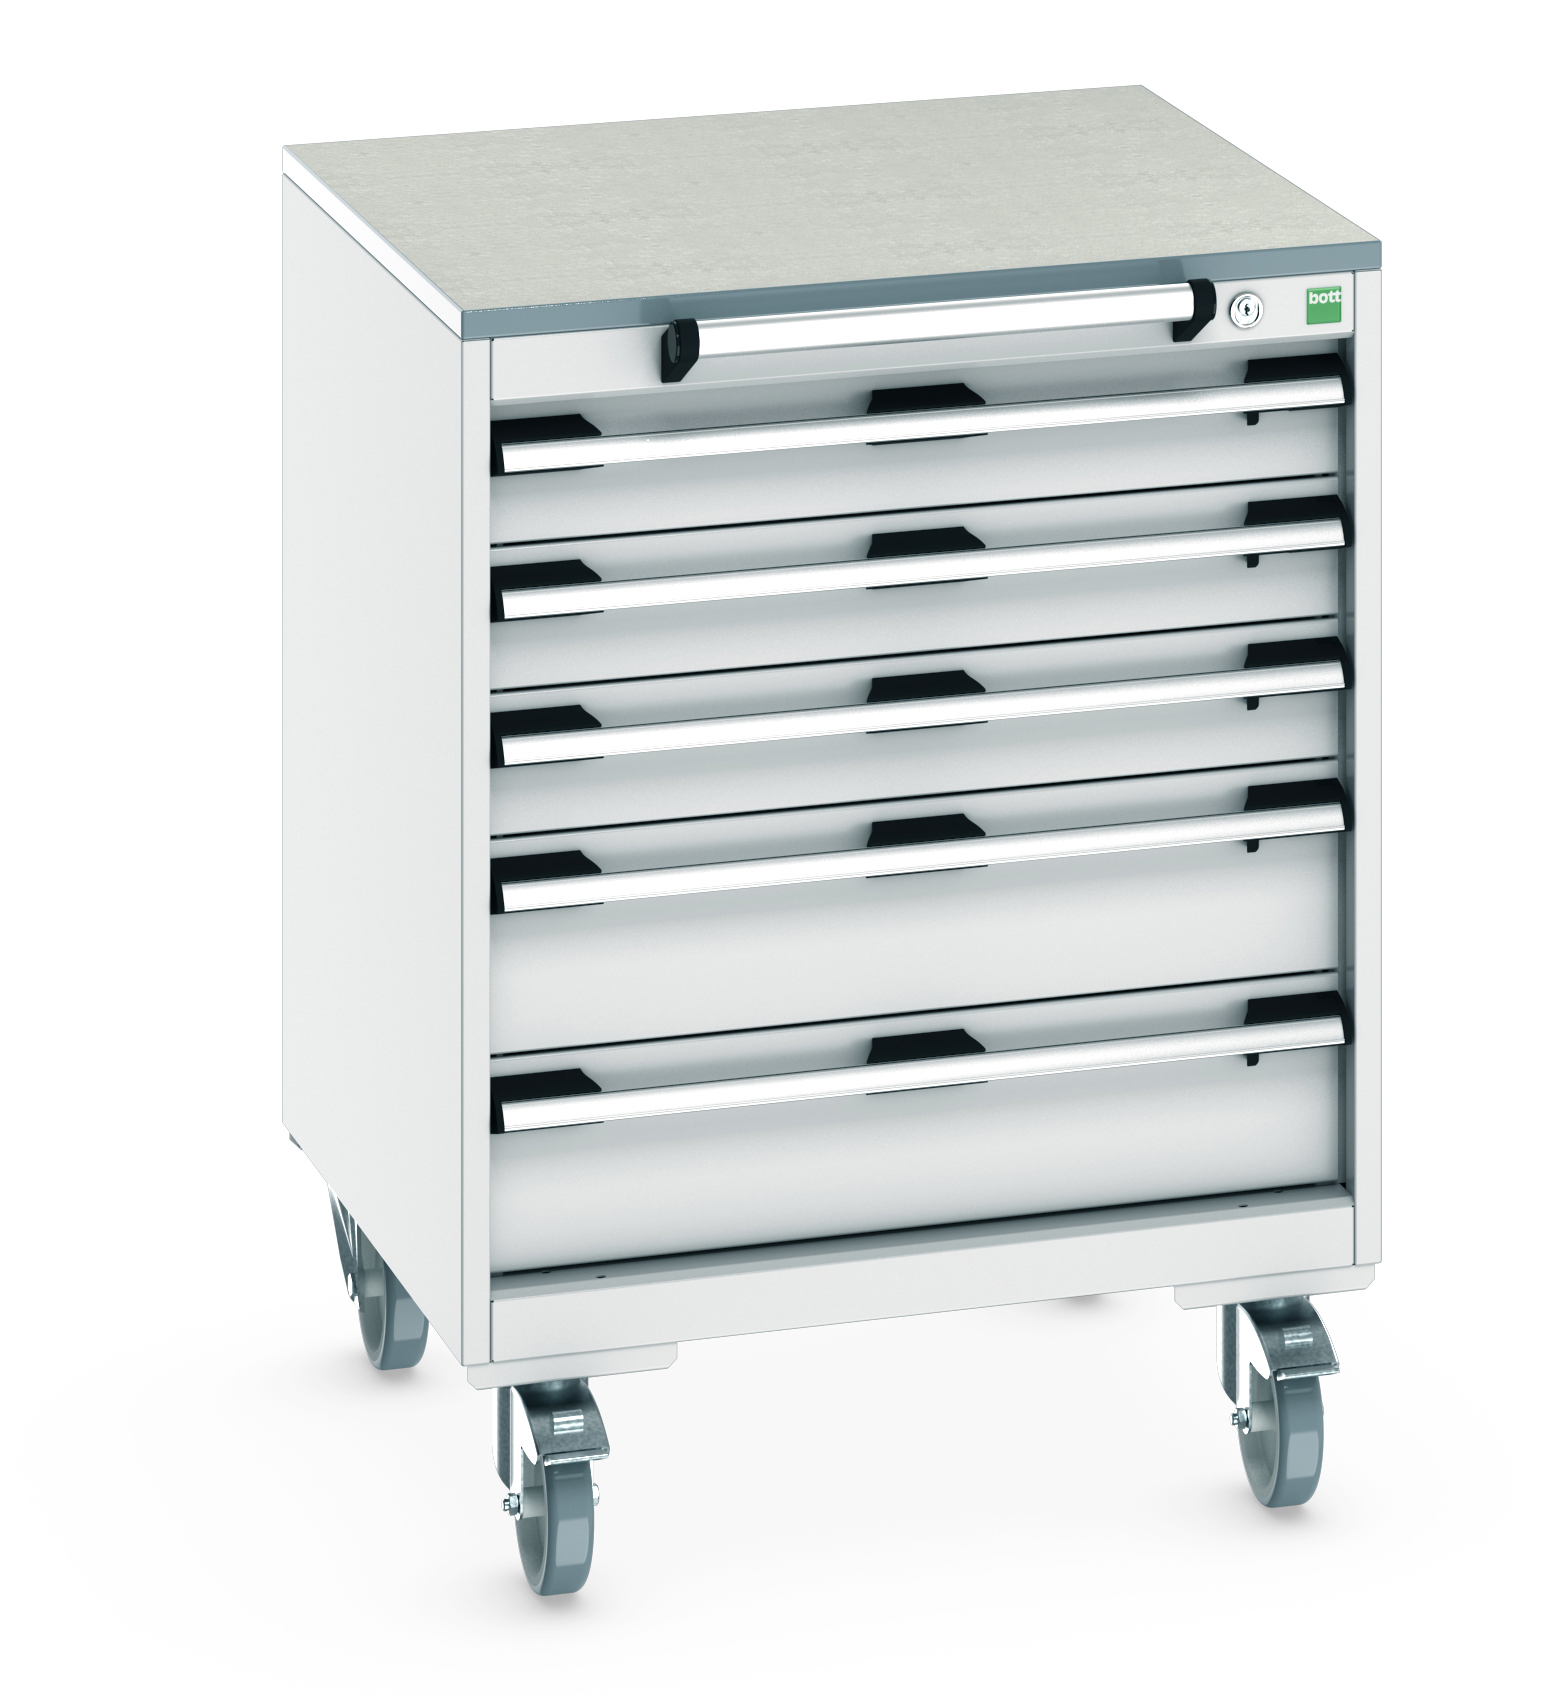 Bott Cubio Mobile Drawer Cabinet With 5 Drawers & Lino Worktop - 40402148.16V